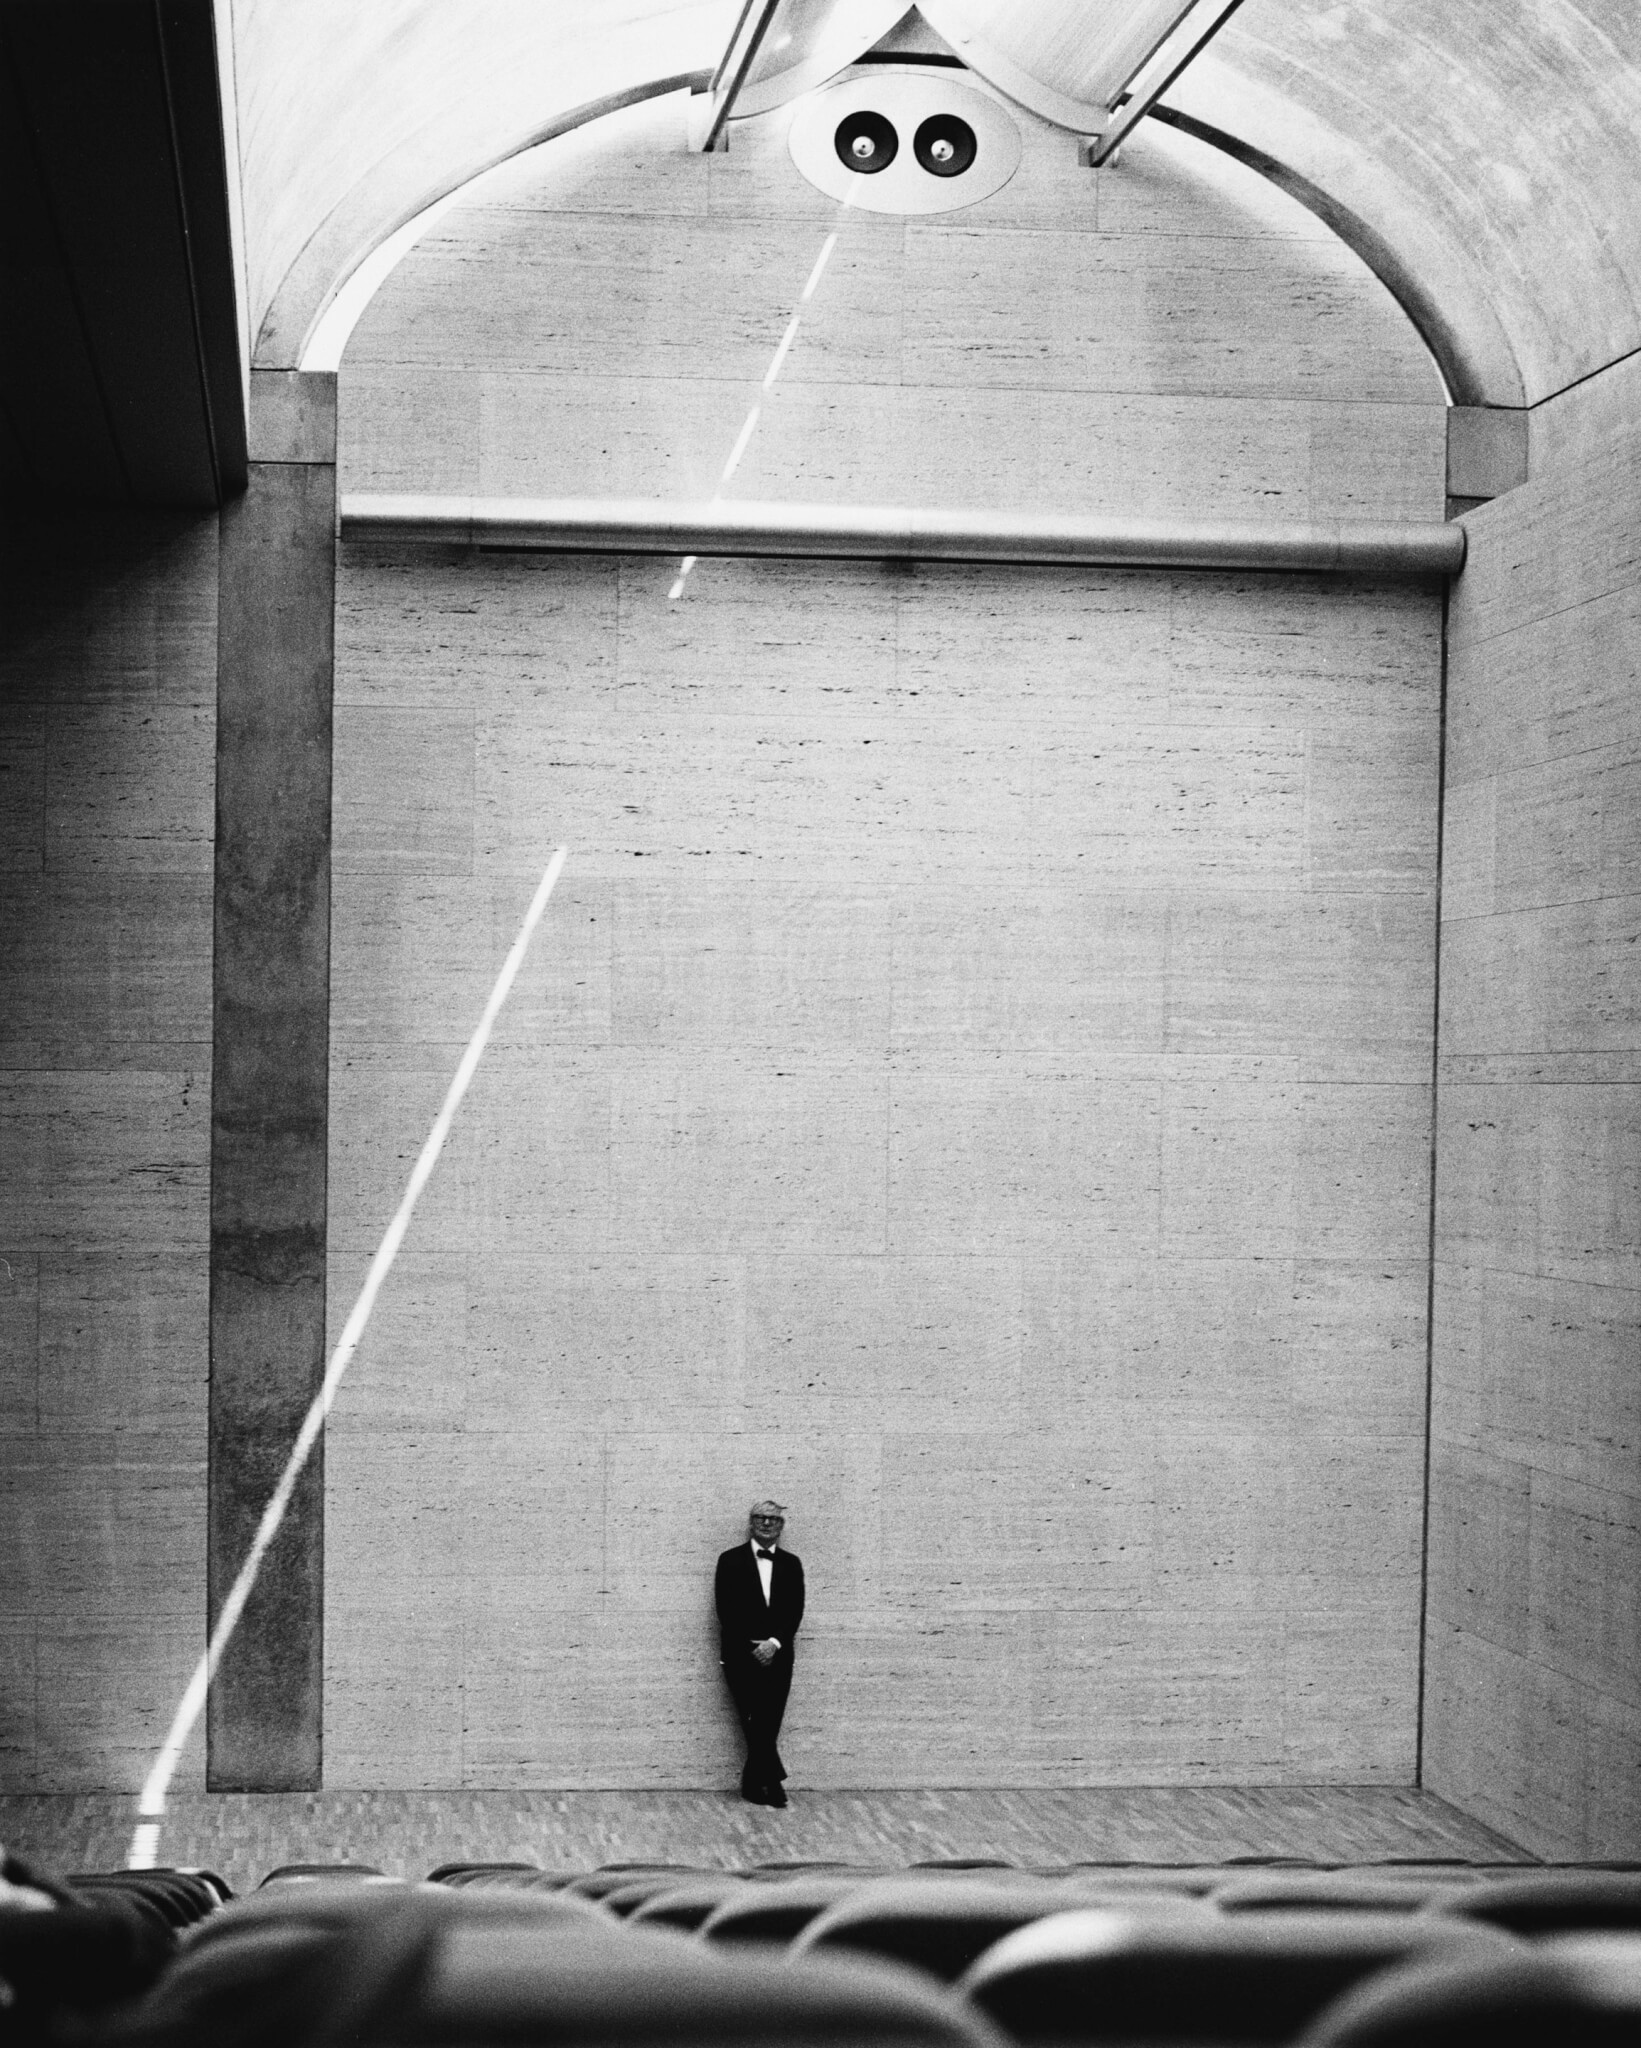 architect louis kahn pictured at his kimbell art museum in fort worth, texas